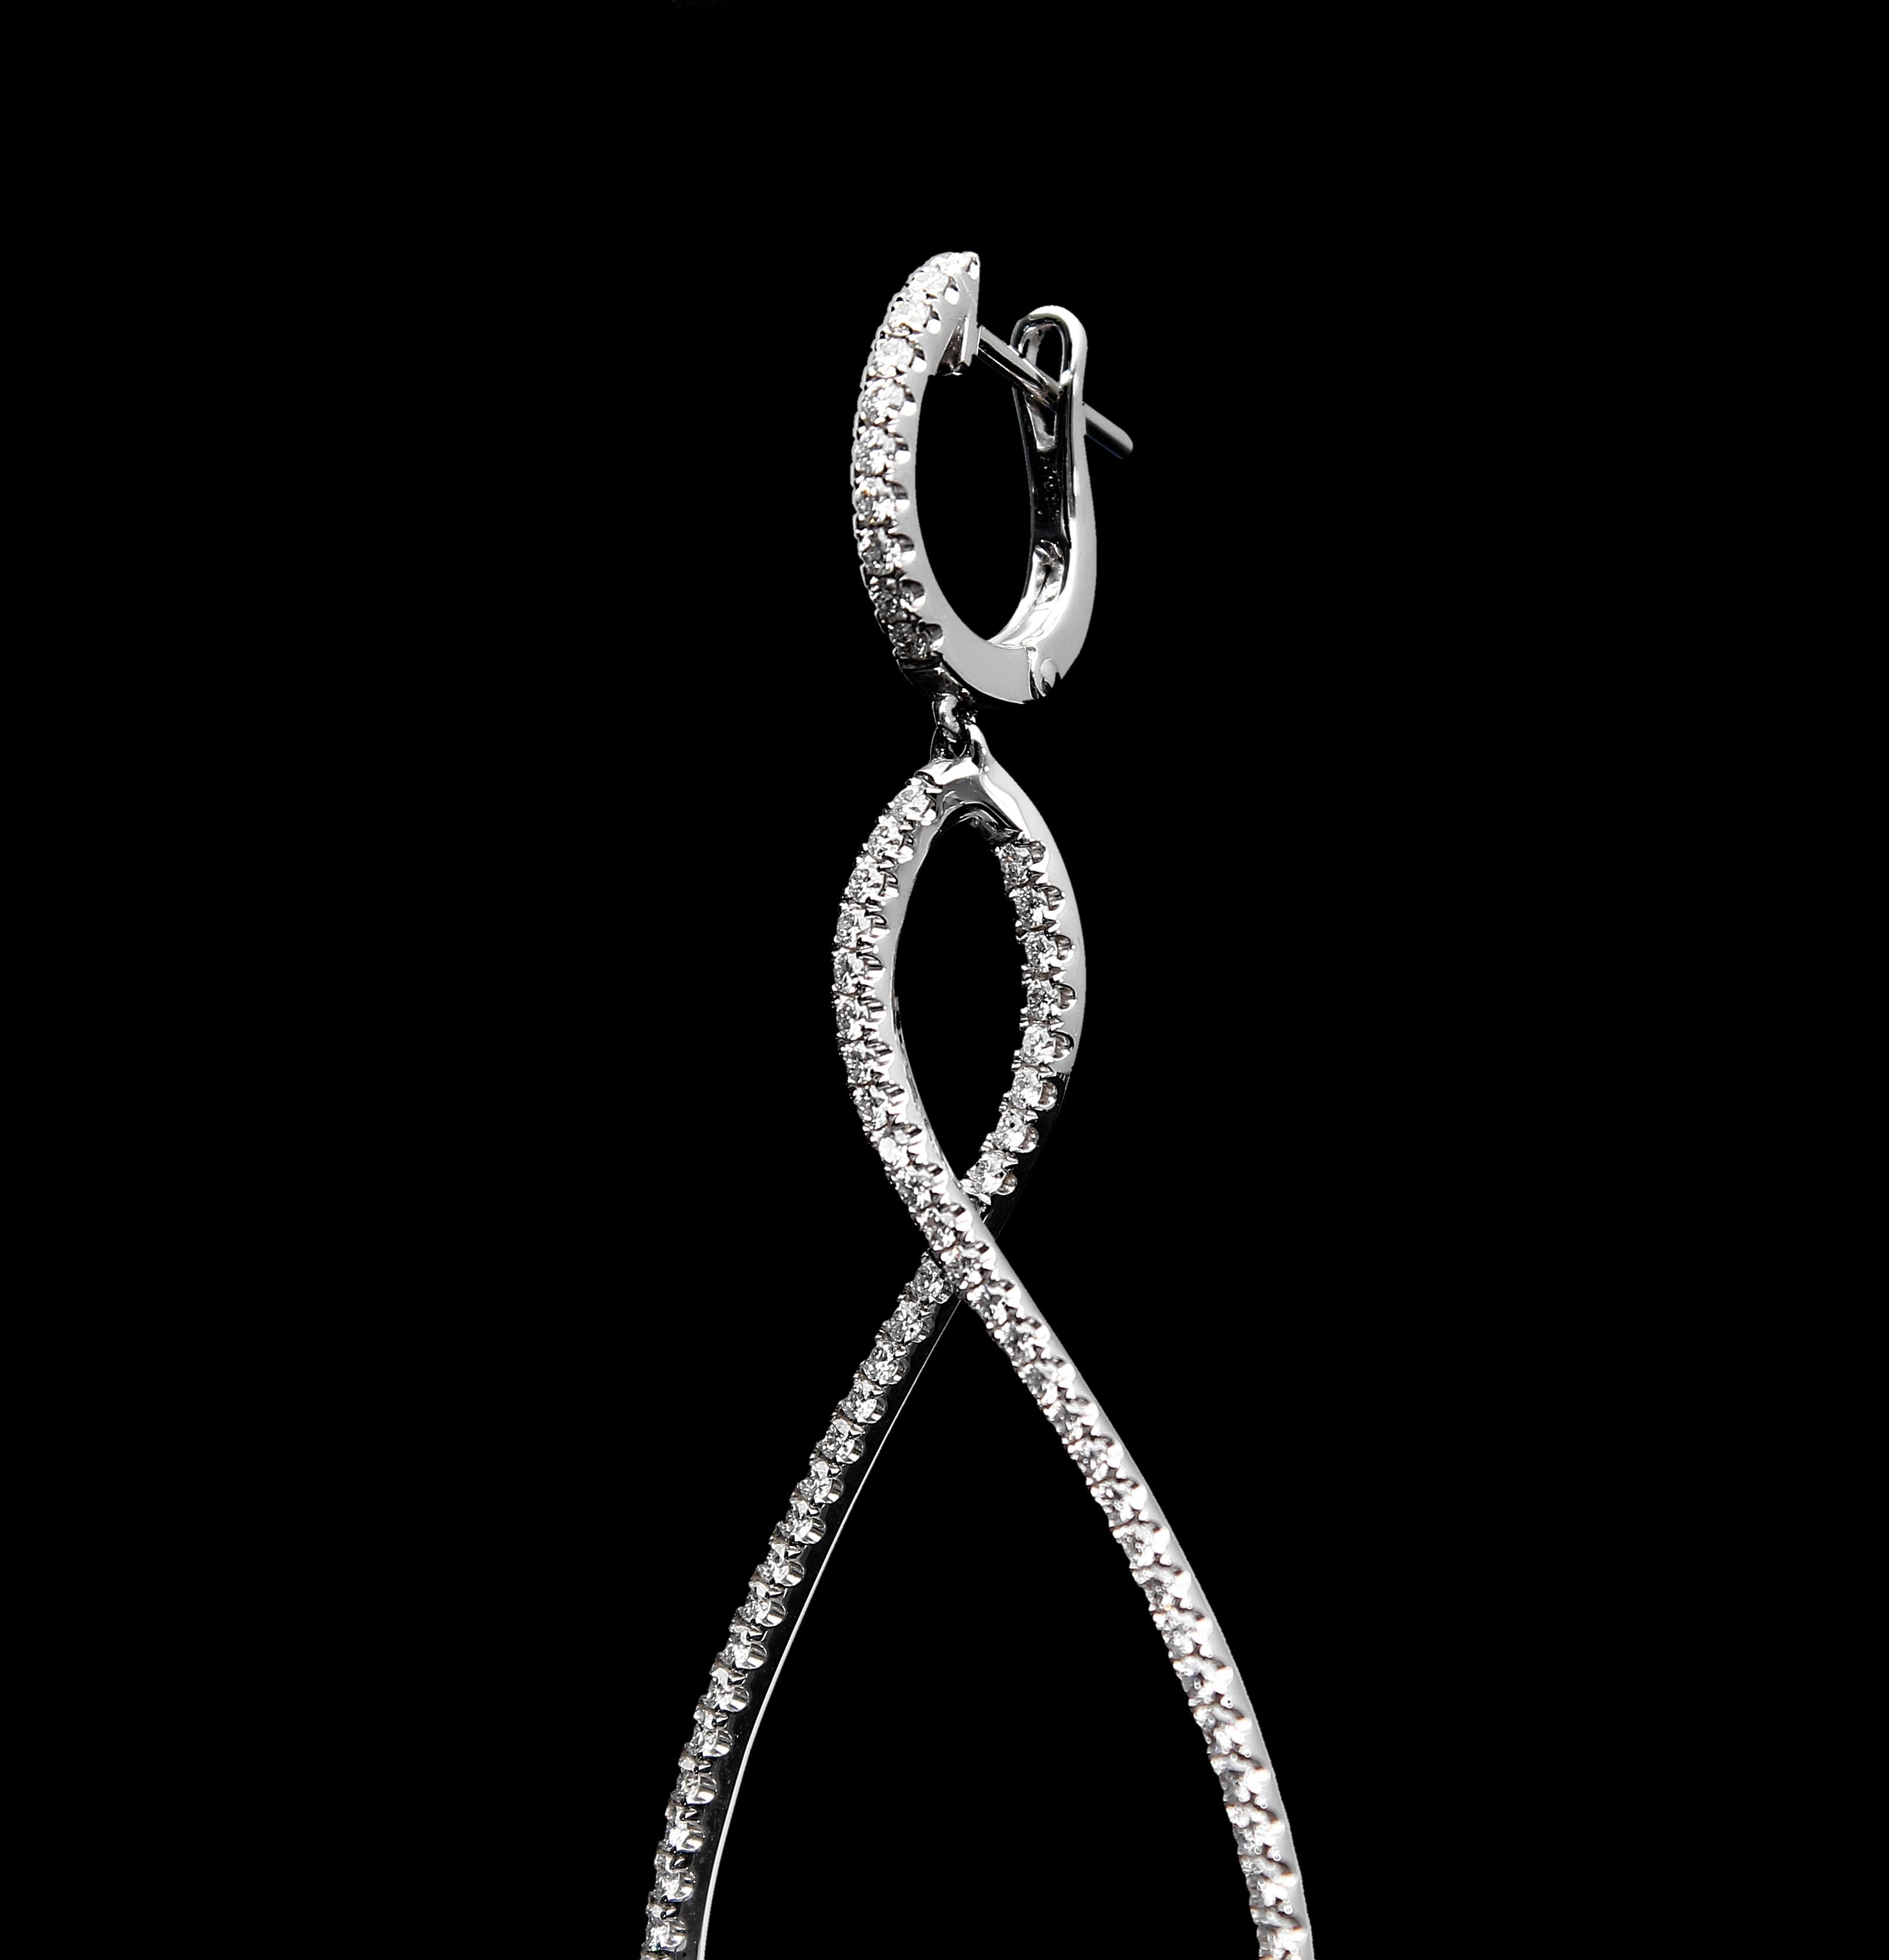 Helical-Shaped Earrings with 1.40 ct of Diamonds. Gold 18 kt White  For Sale 8